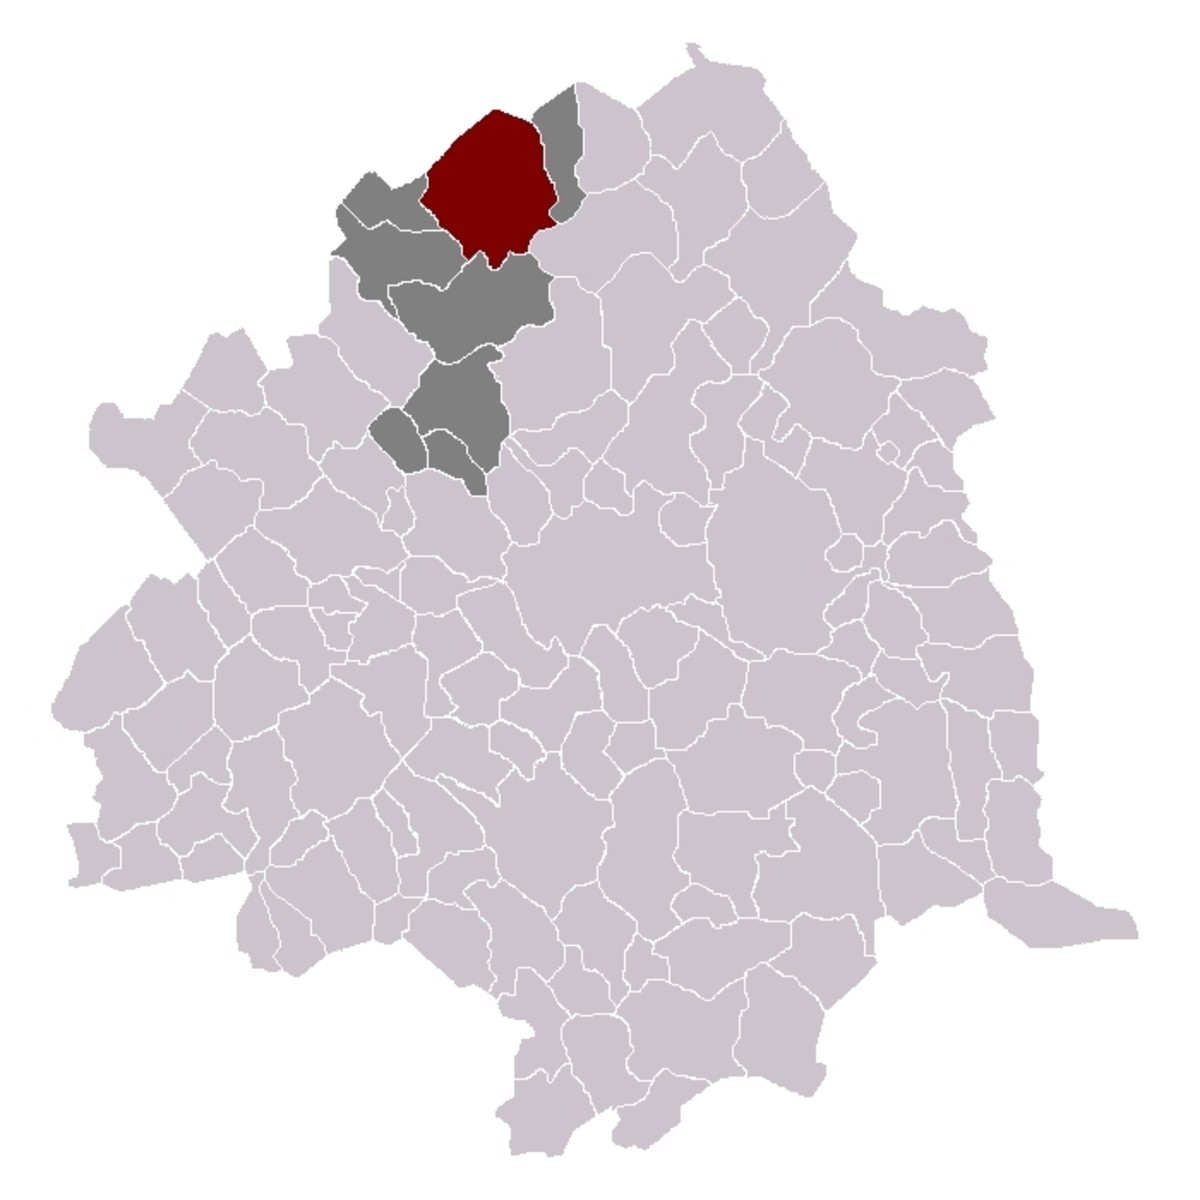 Map location of Comines (France) within Lille 'arrondissement' 